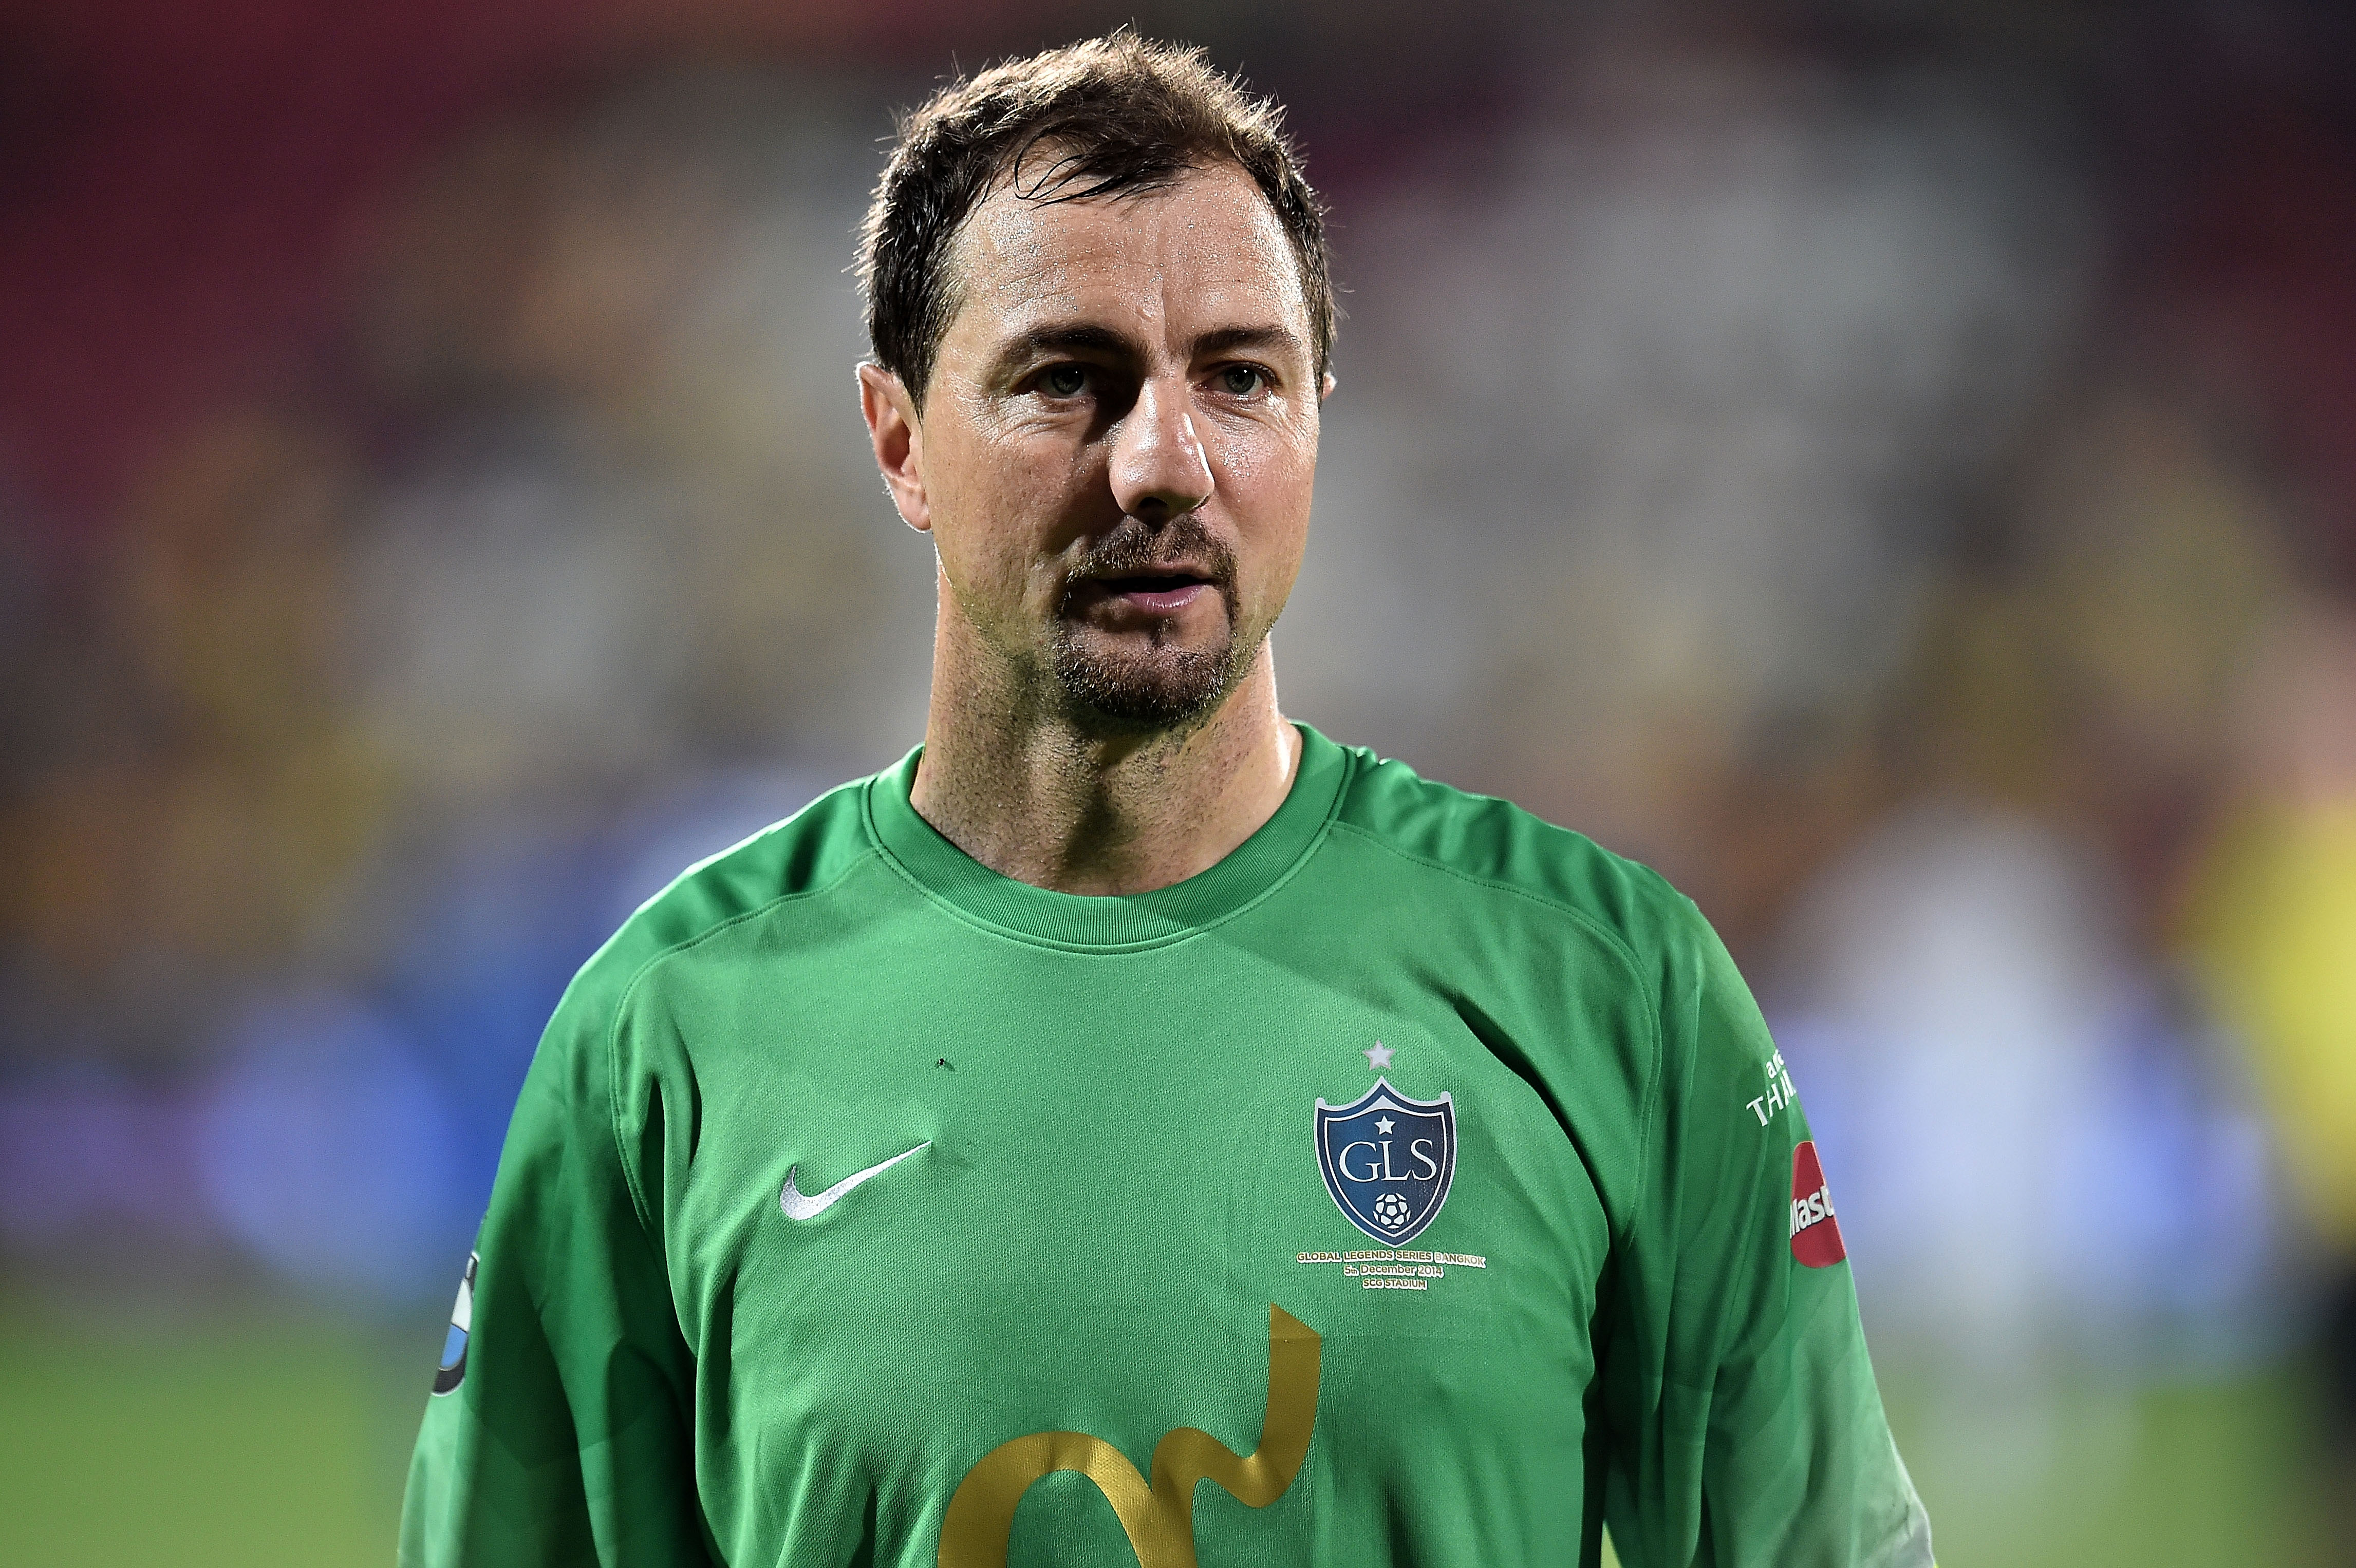 BANGKOK, THAILAND - DECEMBER 05: Jerzy Dudek of Team Cannavaro looks on during the Global Legends Series match, at the SCG Stadium on December 5, 2014 in Bangkok, Thailand.  (Photo by Thananuwat Srirasant/Getty Images)